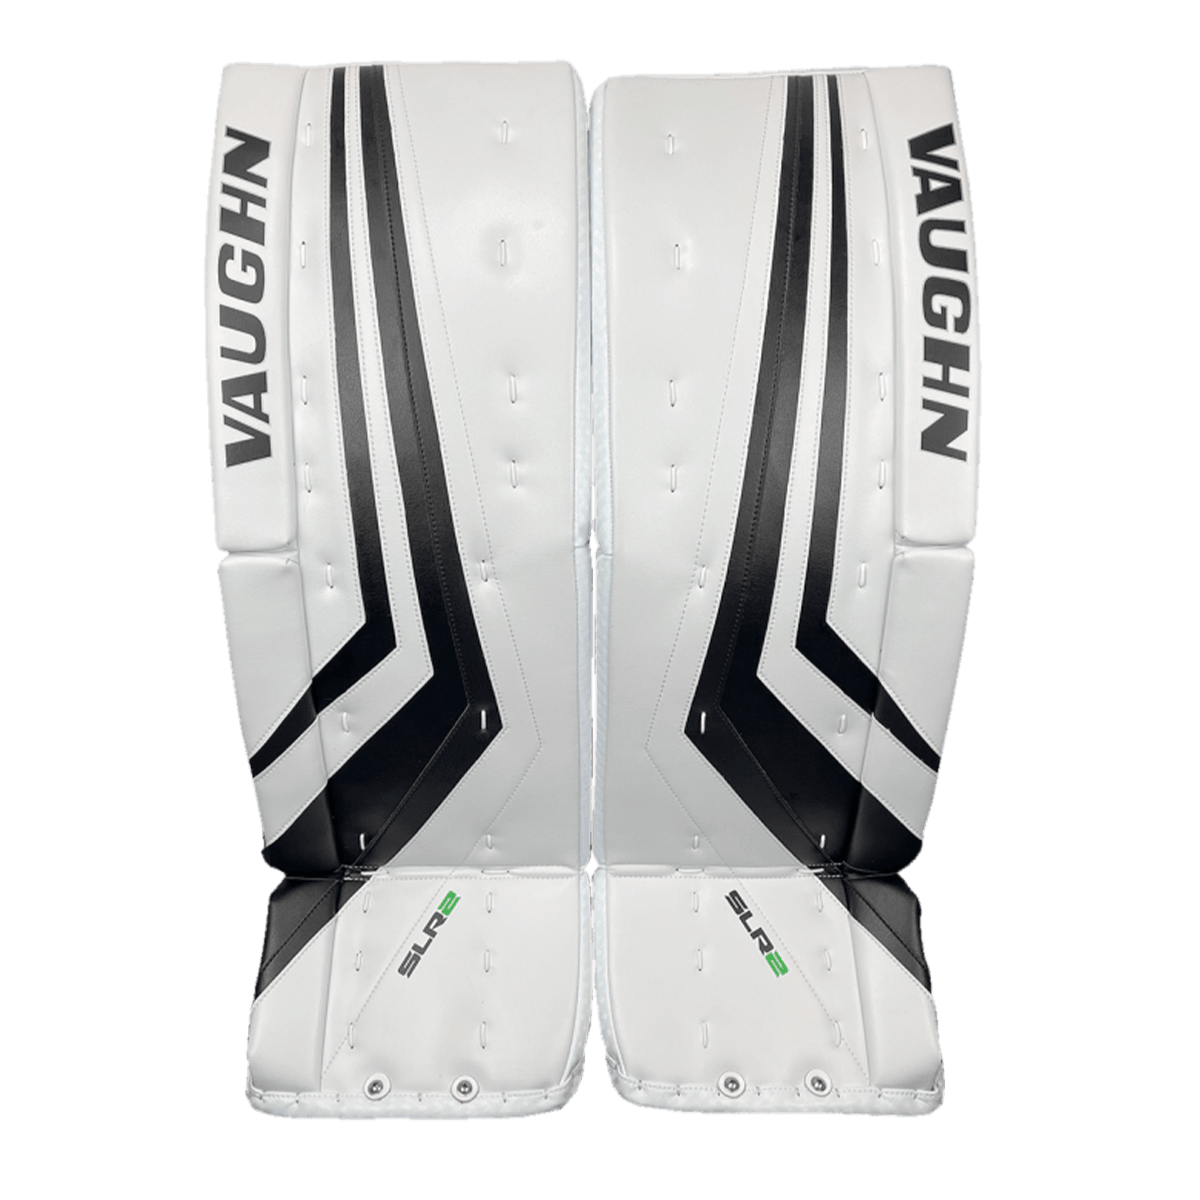 Goalie Pad Sizing Guide What Size Goalie Pad Do I Need?, 52% OFF